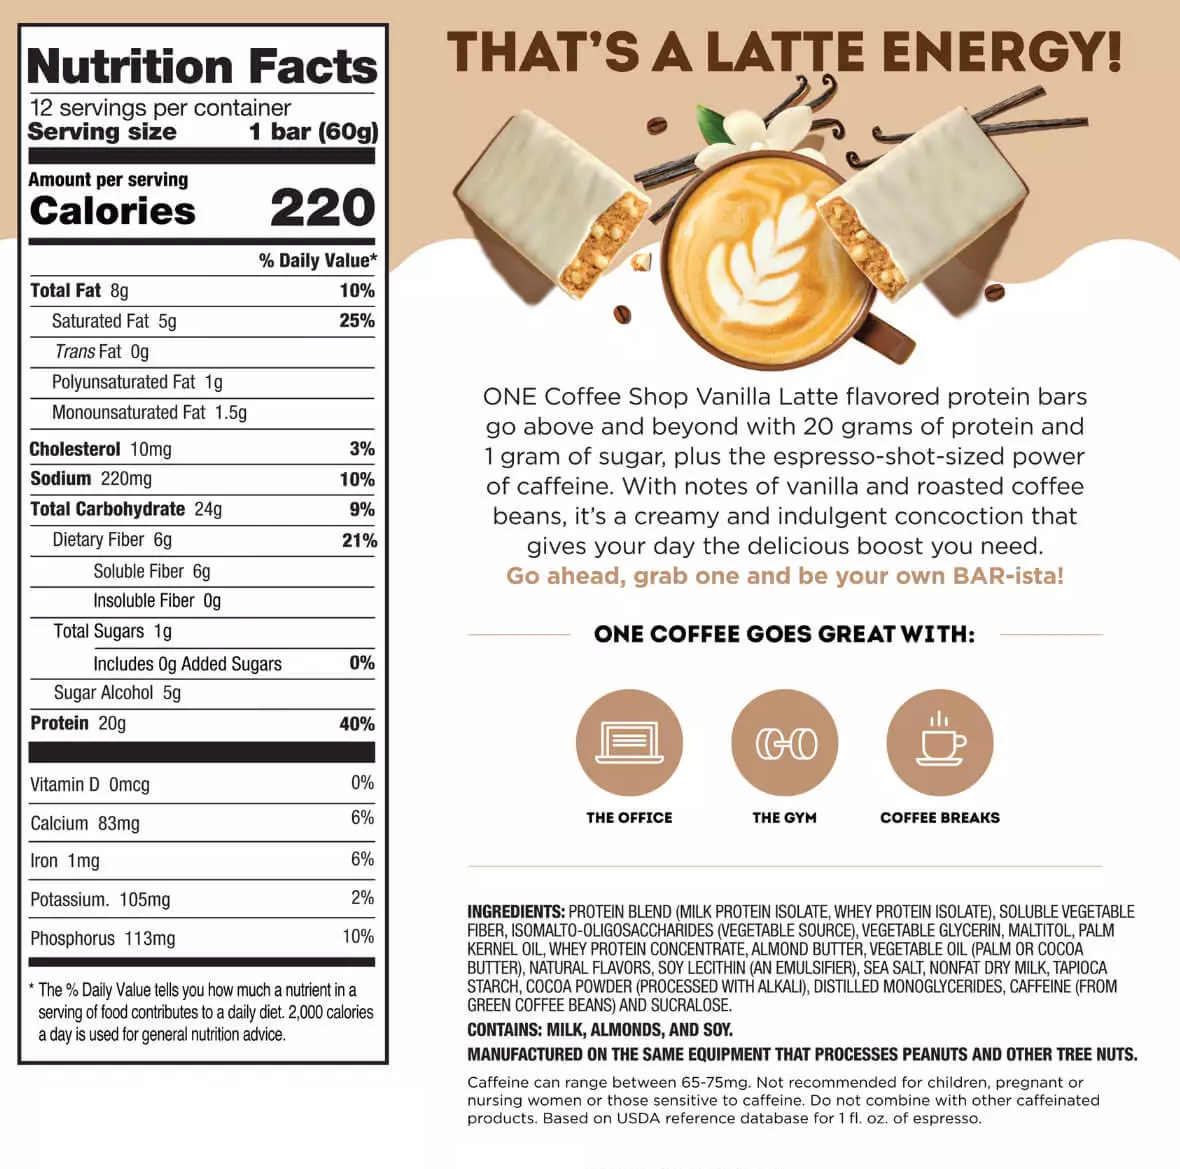 Nutrition label for ONE Coffee Shop Vanilla Latte protein bars; each bar contains 20g protein, is made with natural ingredients, and has a caffeine content equivalent to a shot of espresso.